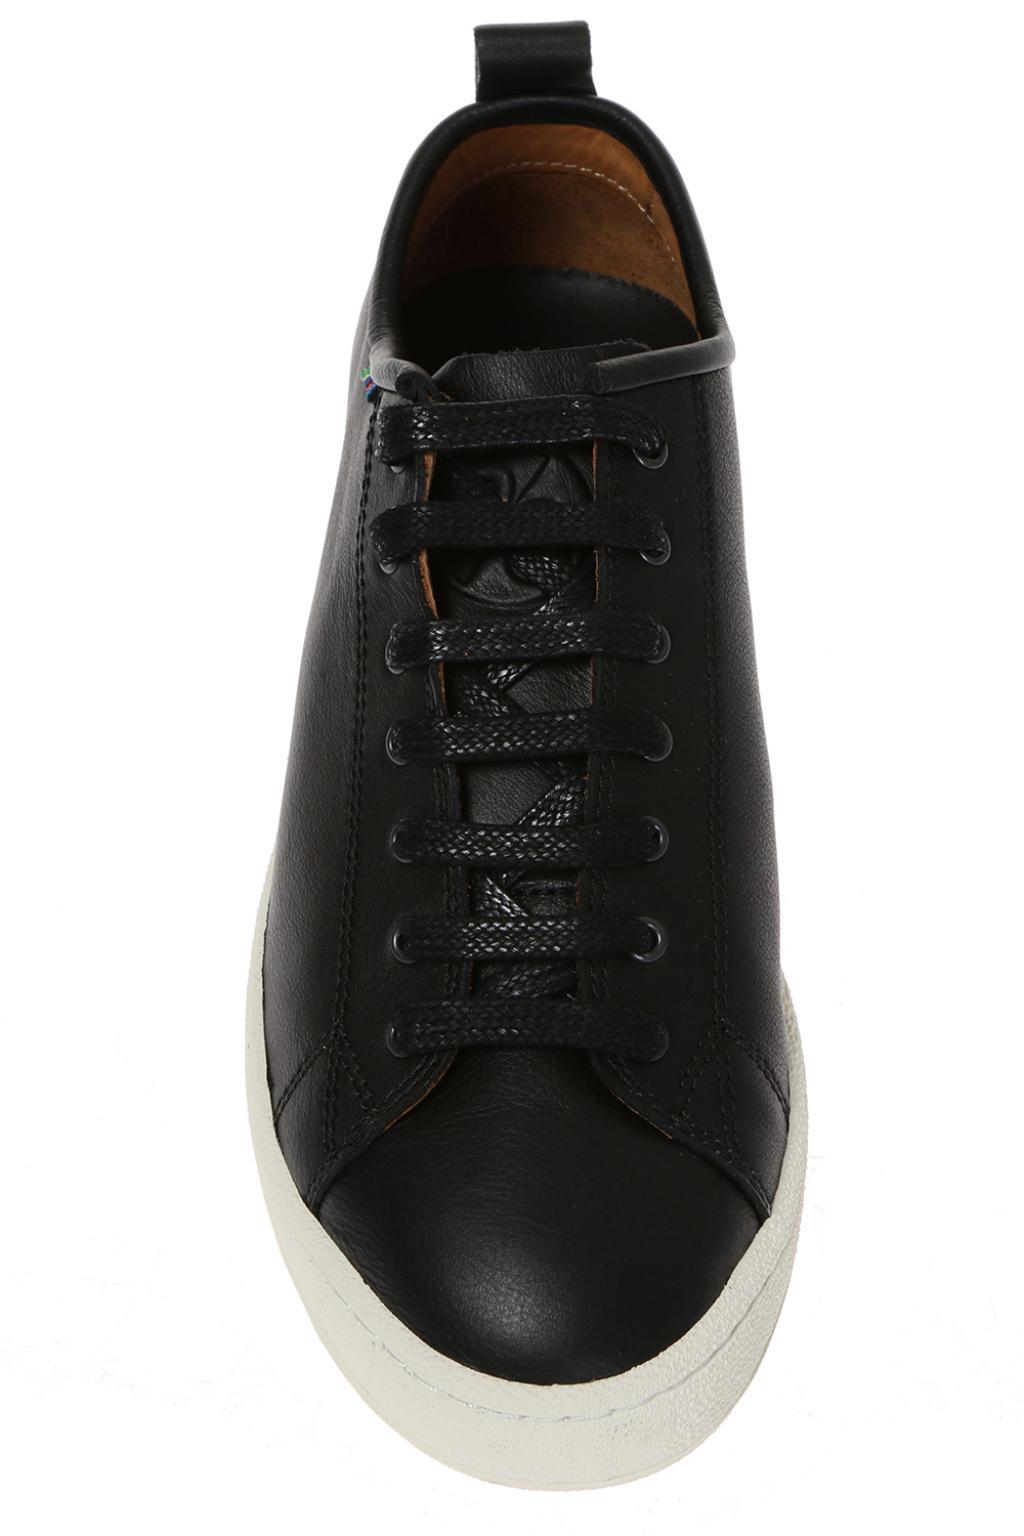 Lyst - Paul Smith Miyata Leather Trainers in Black for Men - Save 30%